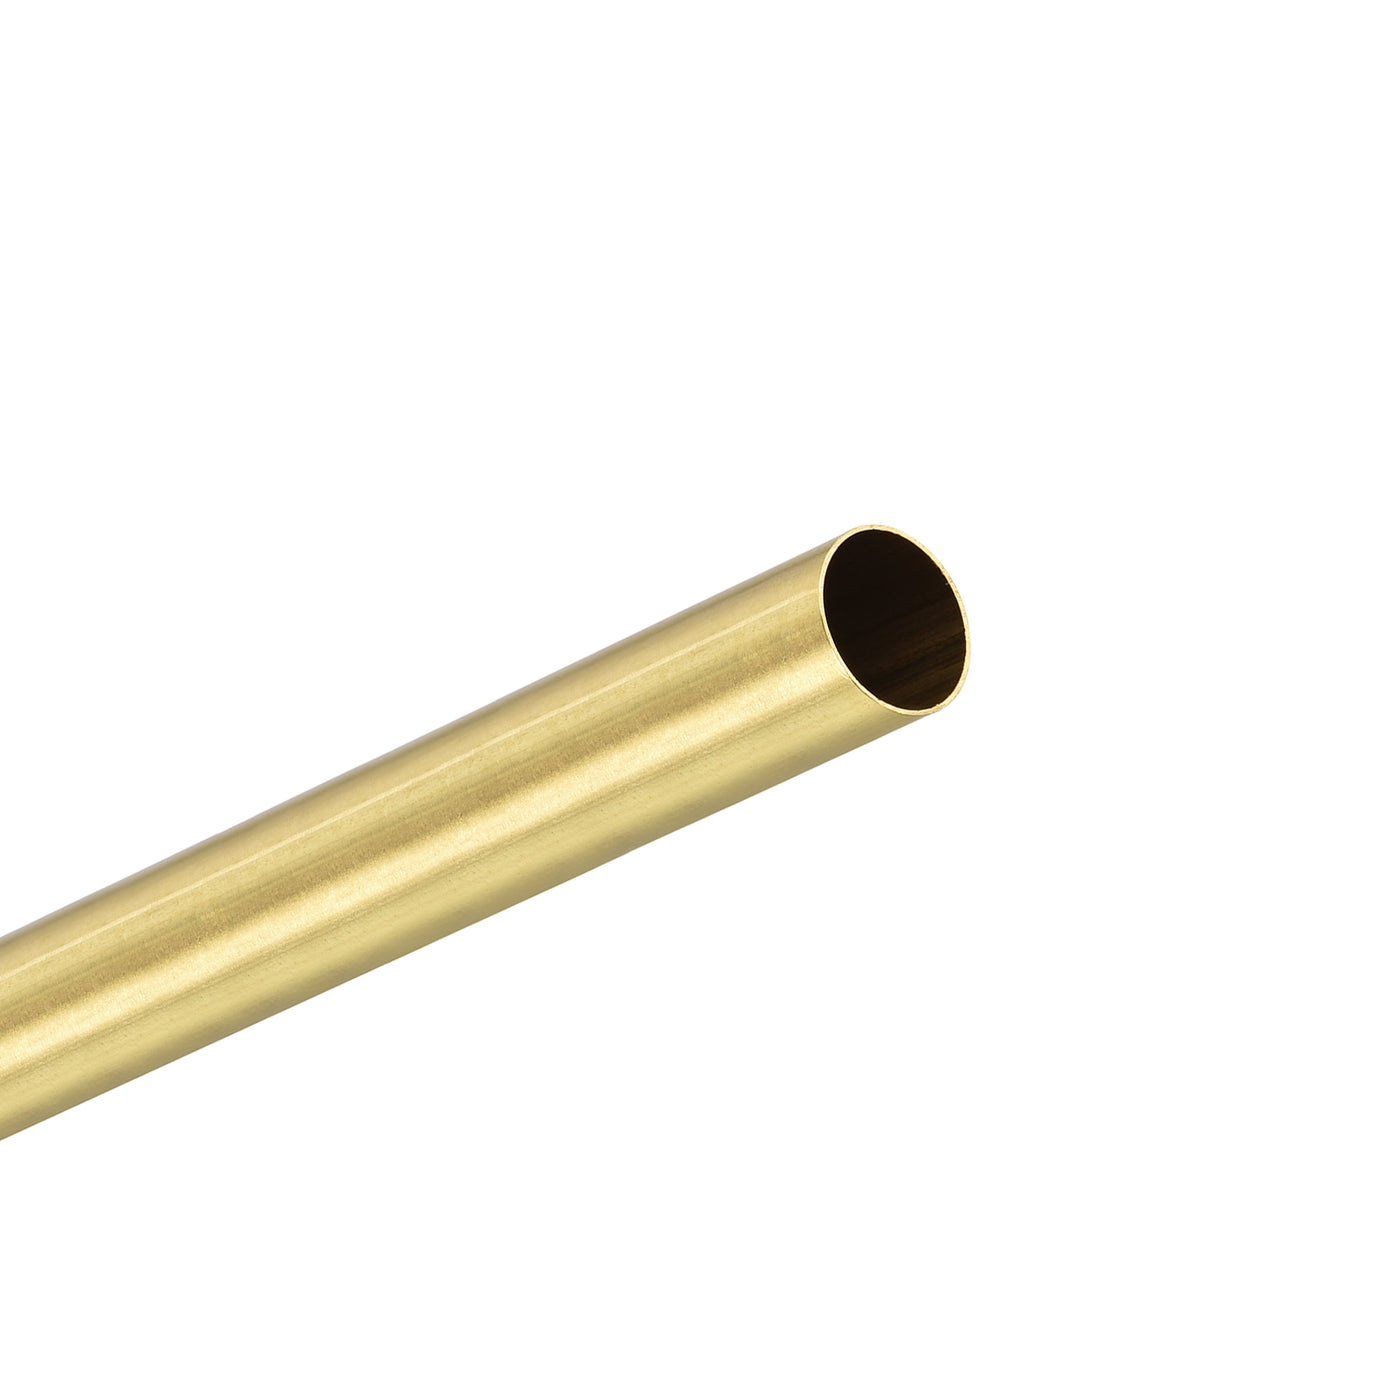 Uxcell Uxcell Brass Round Tube 9.5mm OD 0.25mm Wall Thickness 300mm Length Pipe Tubing 4 Pcs